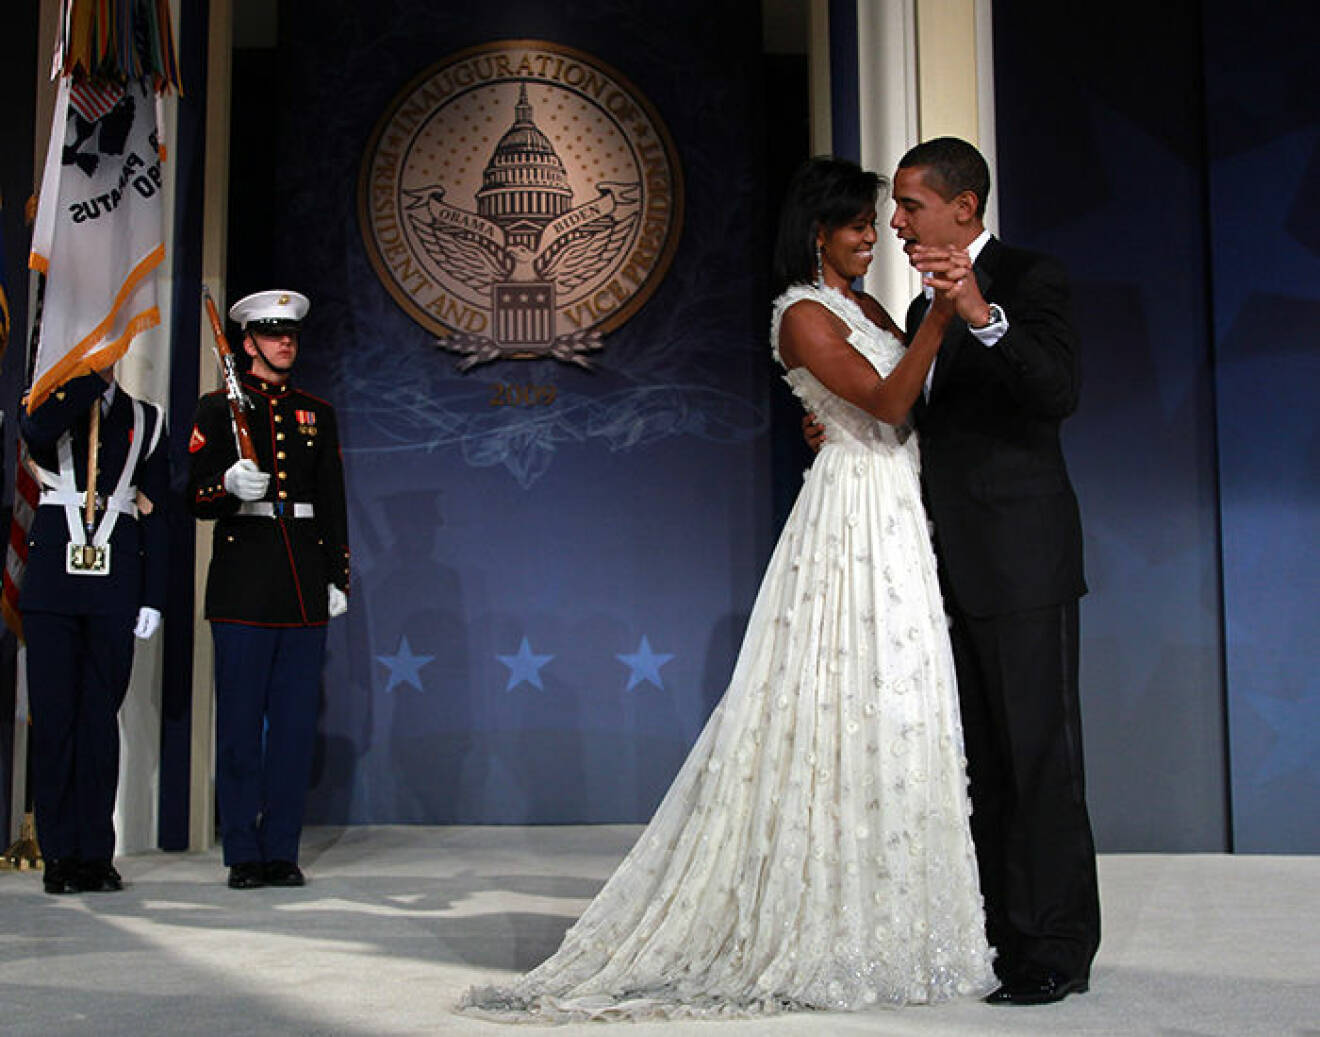 US President Barack Obama and First Lady Michelle Obama attend the MTV & ServiceNation: Live From The Youth Inaugural Ball at the Hilton Washington. President Barack Obama was sworn in as the 44th President of the United States today, becoming the first African-American to be elected President of the US. /// Barack Obama and Michelle Obama dance on stage during MTV & ServiceNation: Live From The Youth Inaugural Ball